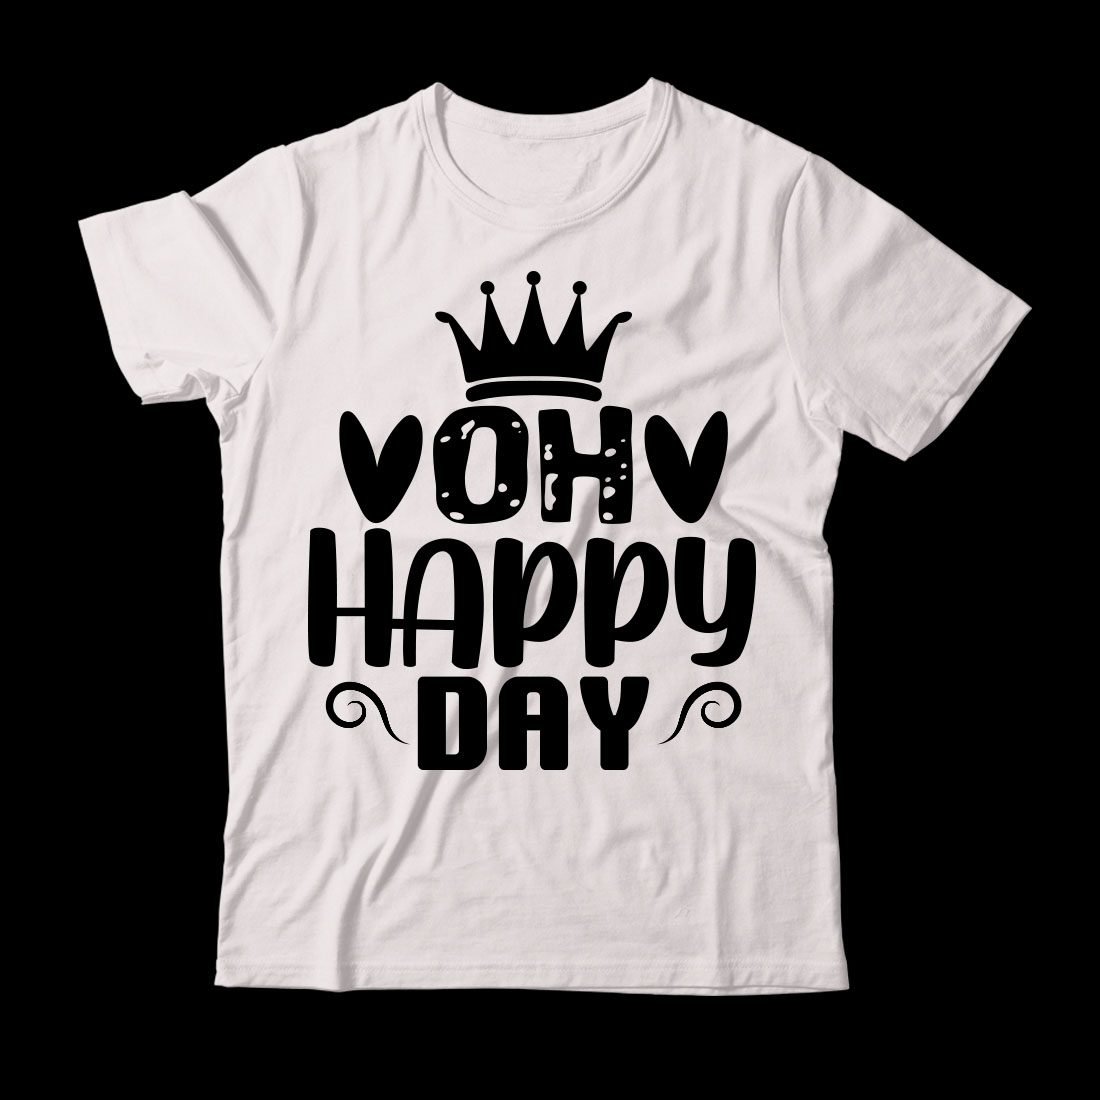 White t - shirt with the words happy day on it.